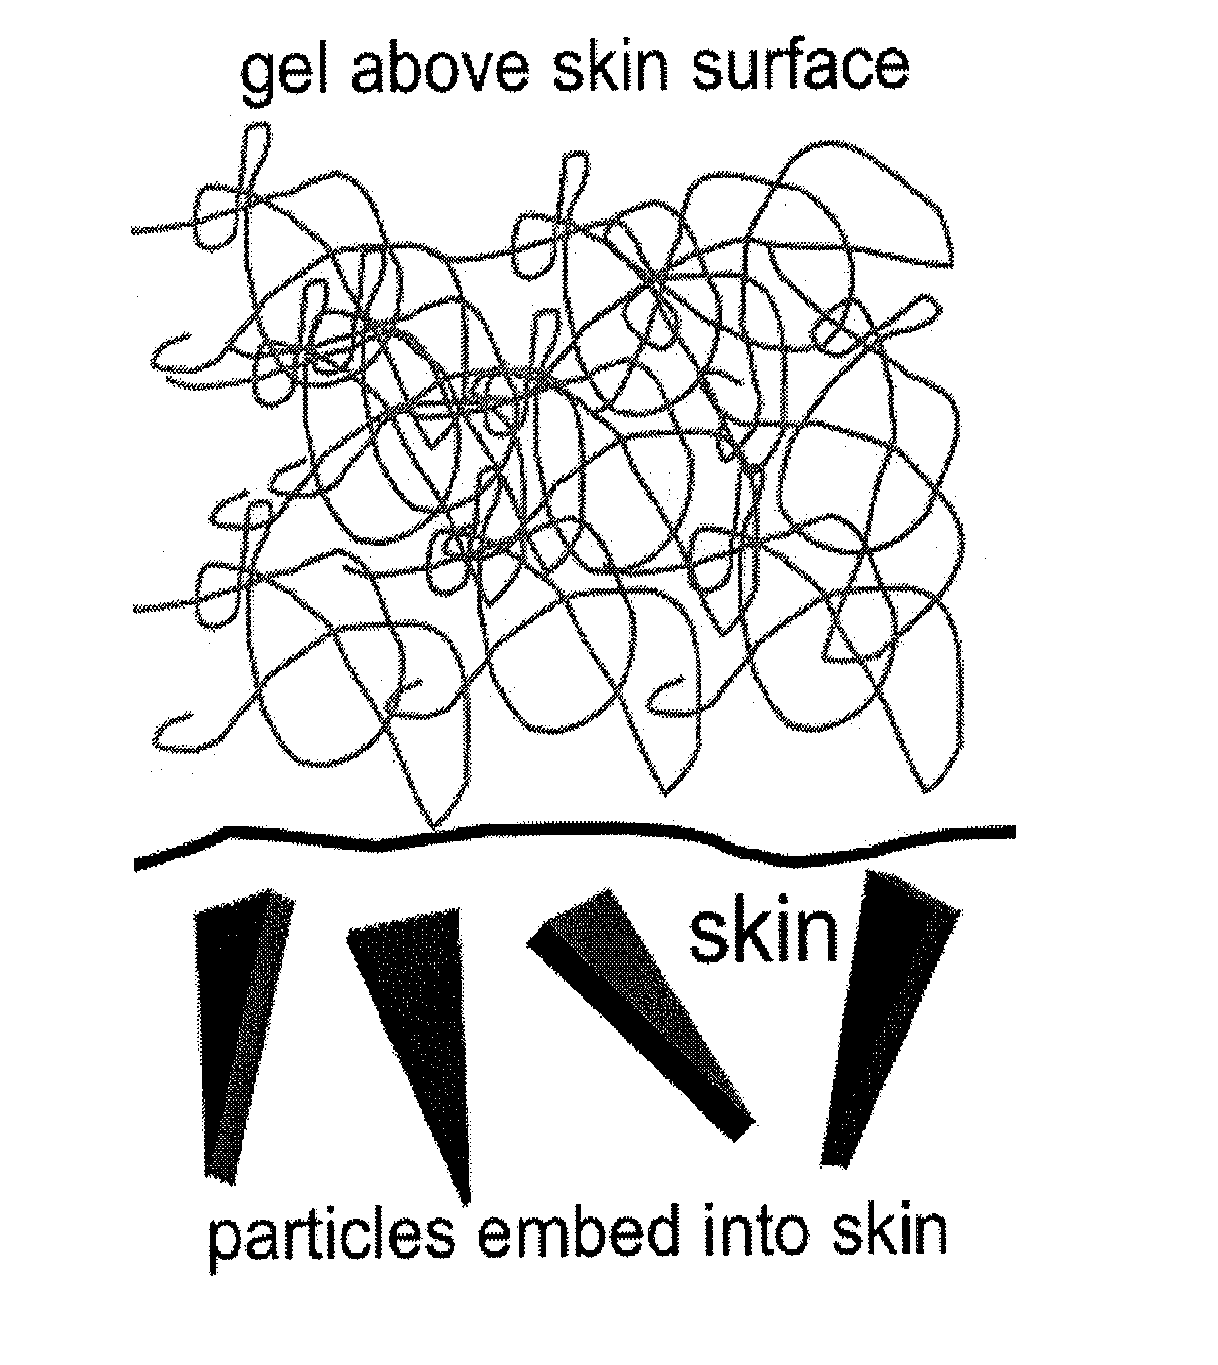 Process for making a topical scrub